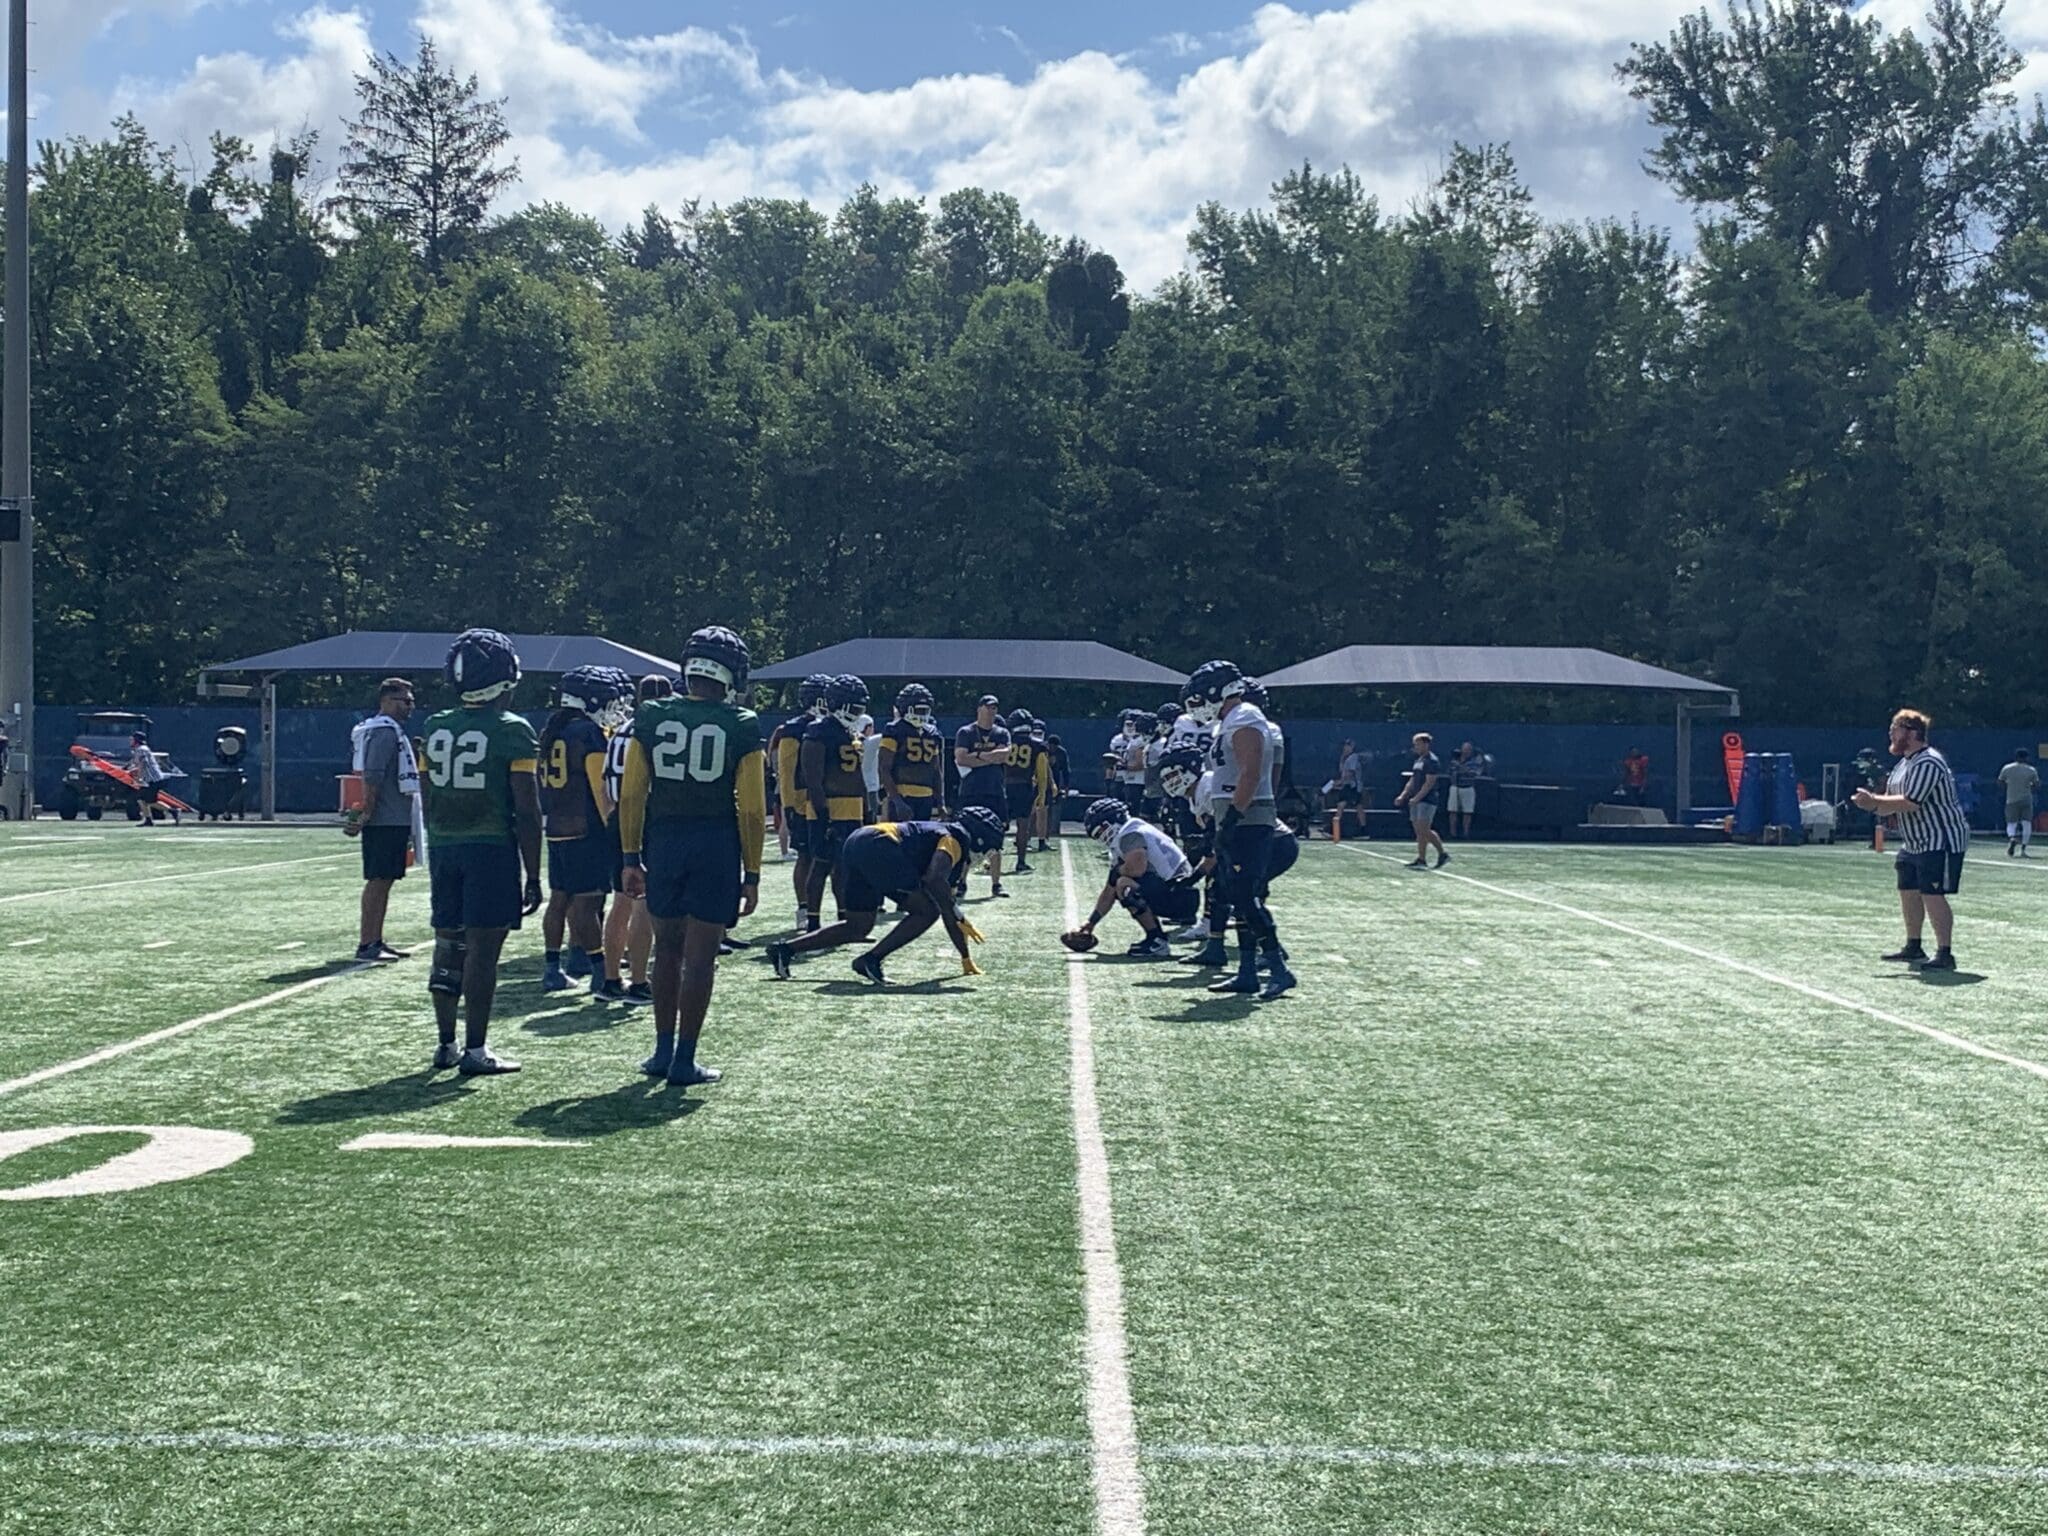 WVU Football OL and DL at practice